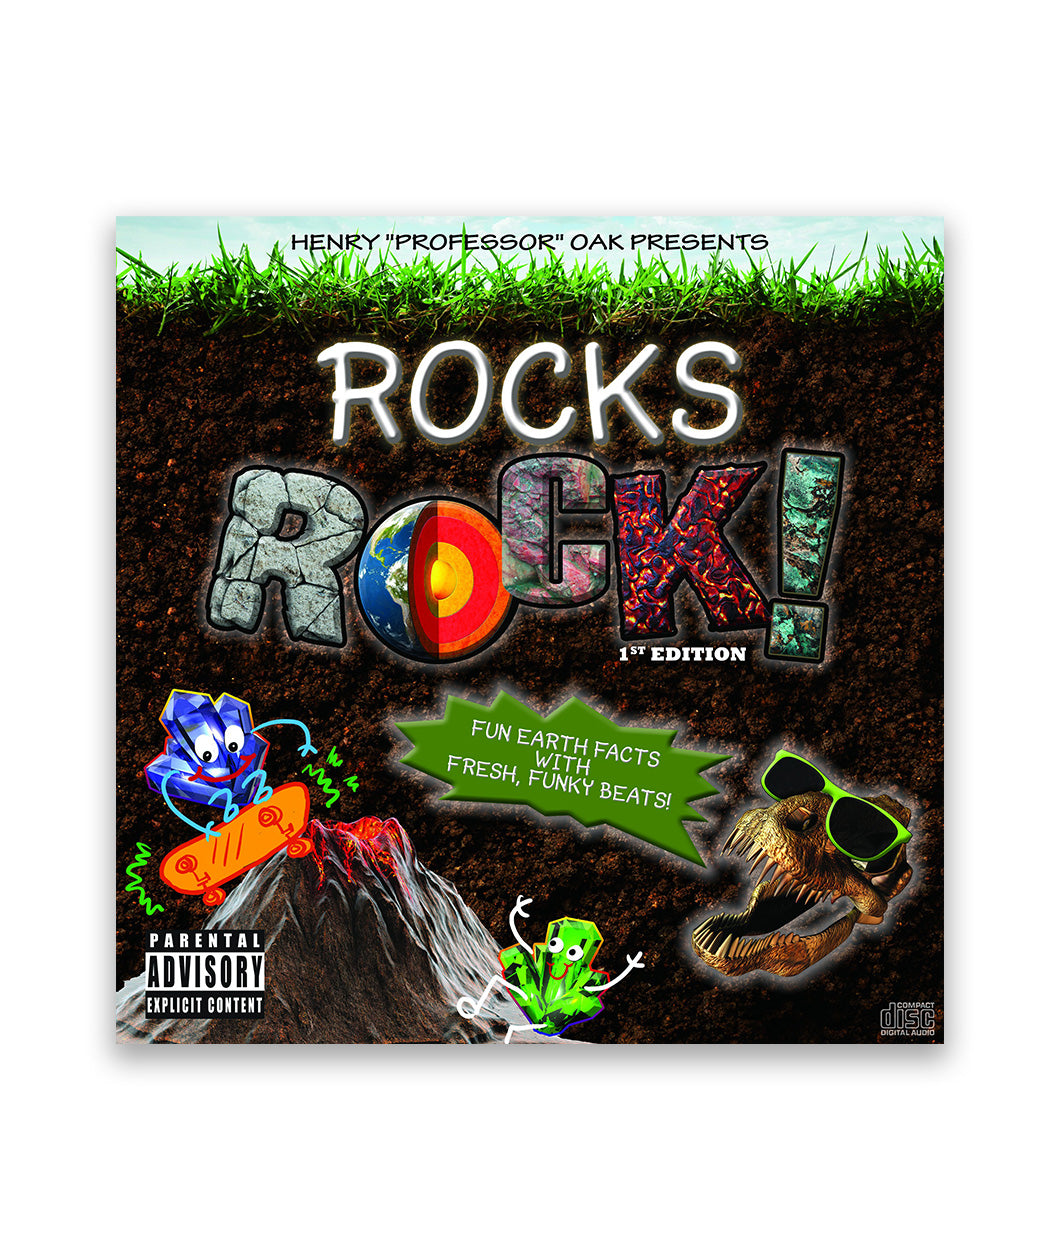 Cover for the ROCKS ROCK! 1st Edition. The text is multicolored and looks like different rocks in the soil and you can see the grass at the illustration.